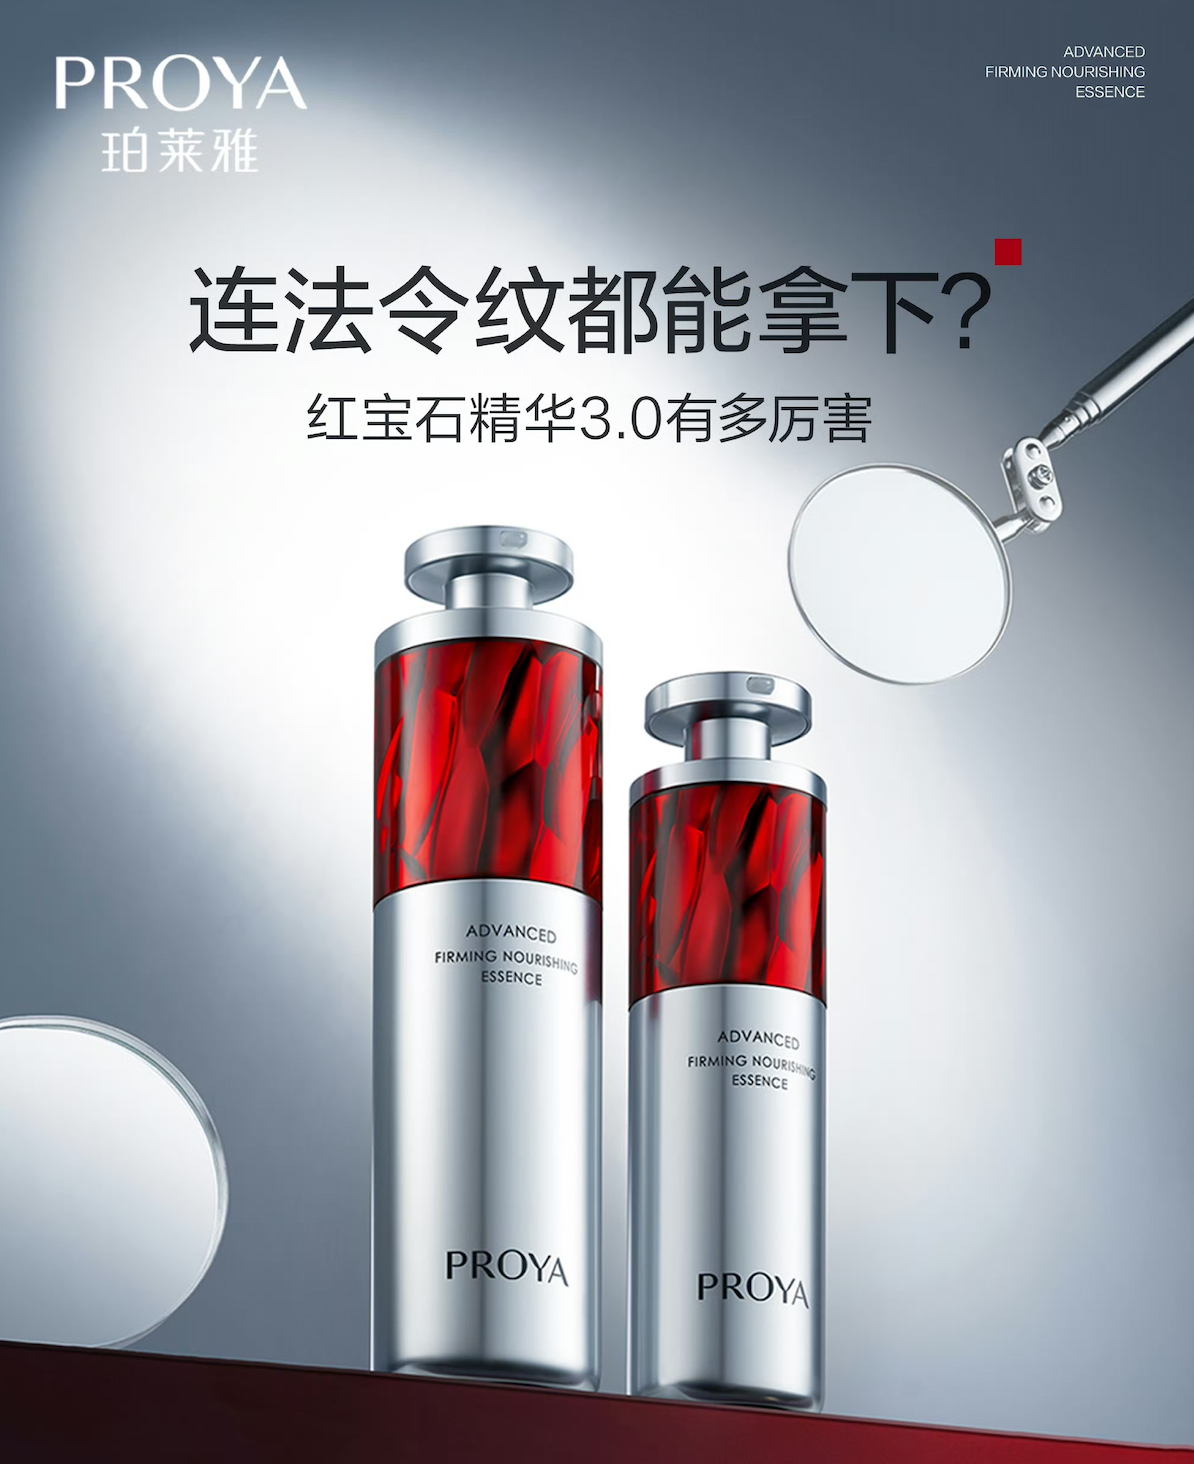 Proya's latest product, Ruby Serum 3.0, is promoted as combating wrinkles. Photo: Proya's Weibo